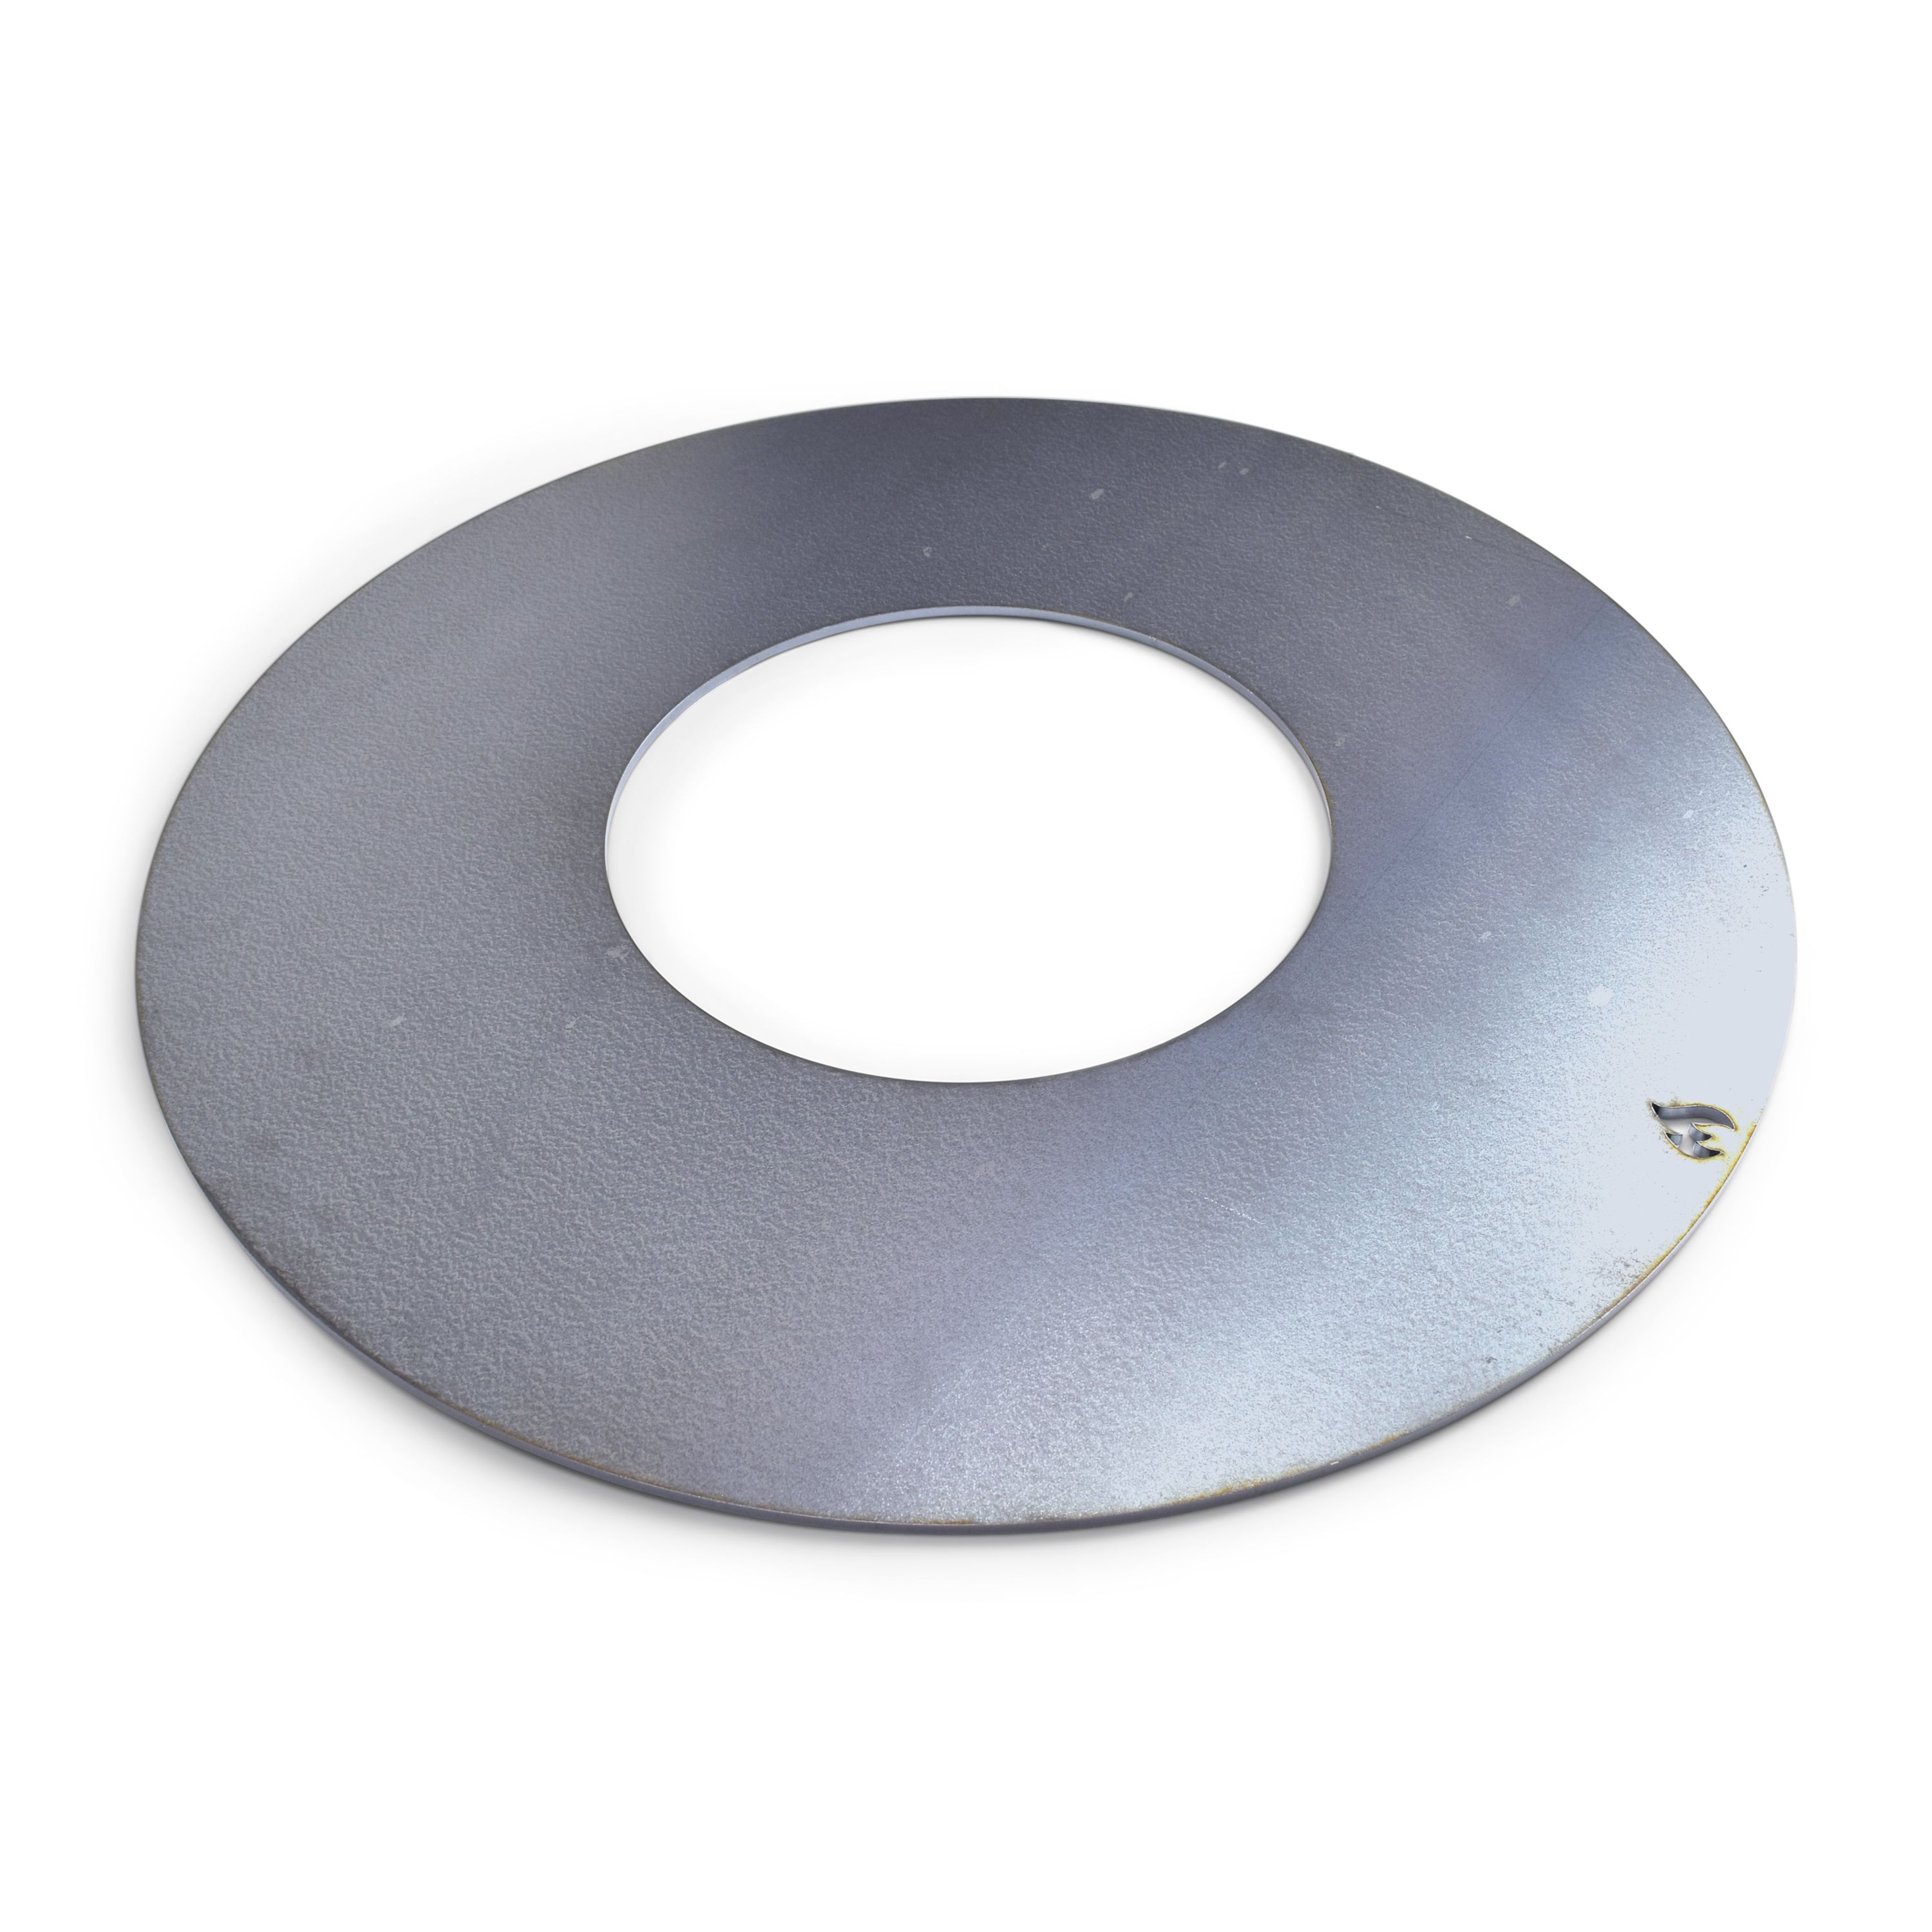 Fire plate 60s Solid grill plate for 60 mm kettle grills